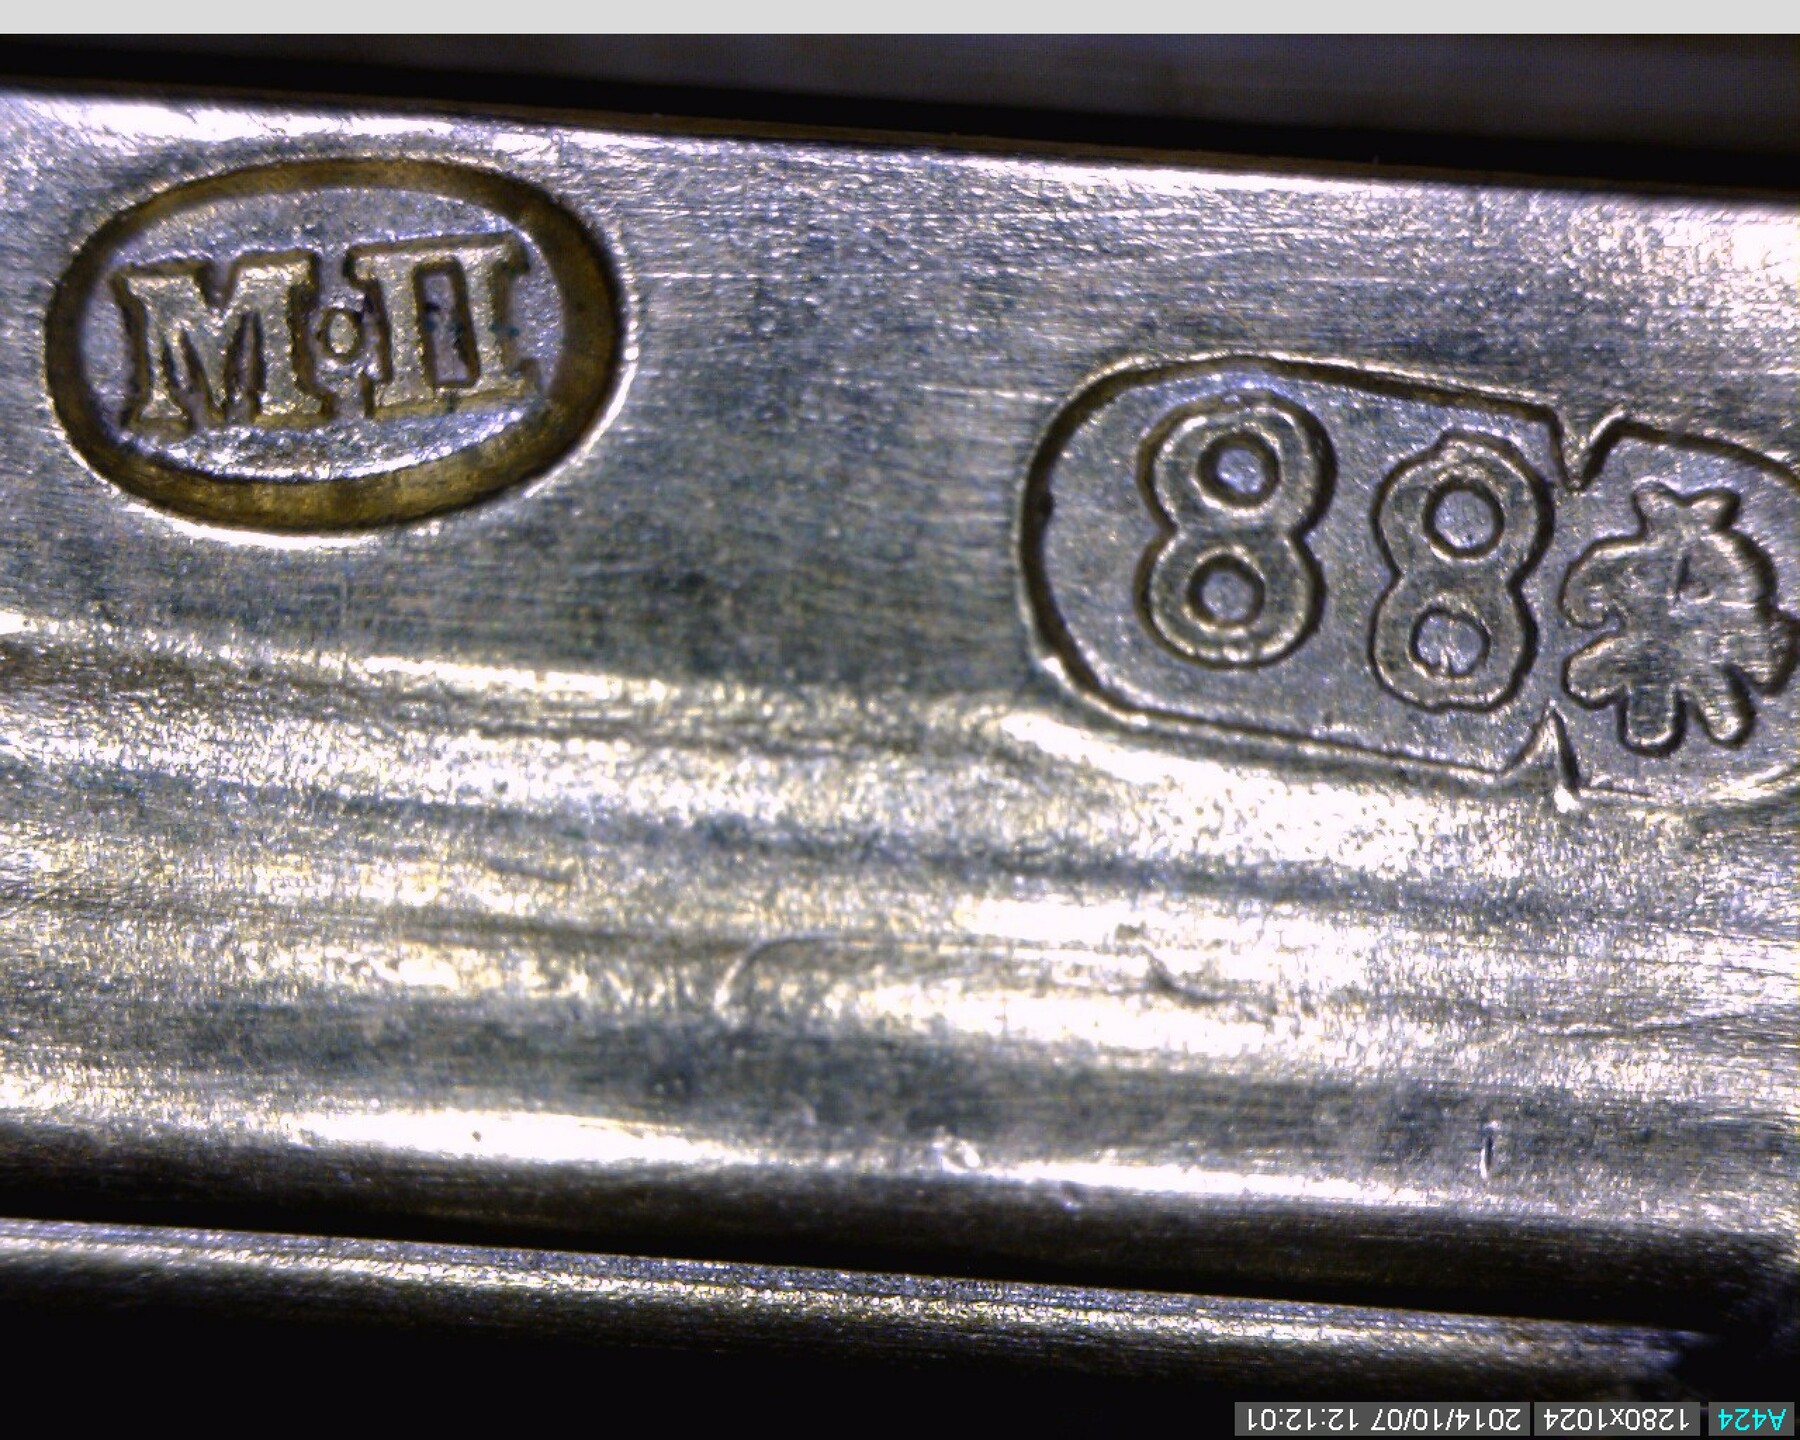 MARK OF FABERGÉ, MAKER’S MARK OF MIKHAIL PERCHIN IN CYRILLIC, ST PETERSBURG, CIRCA 1890, 88 STANDARD, SCRATCHED INVENTORY NUMBER 54505